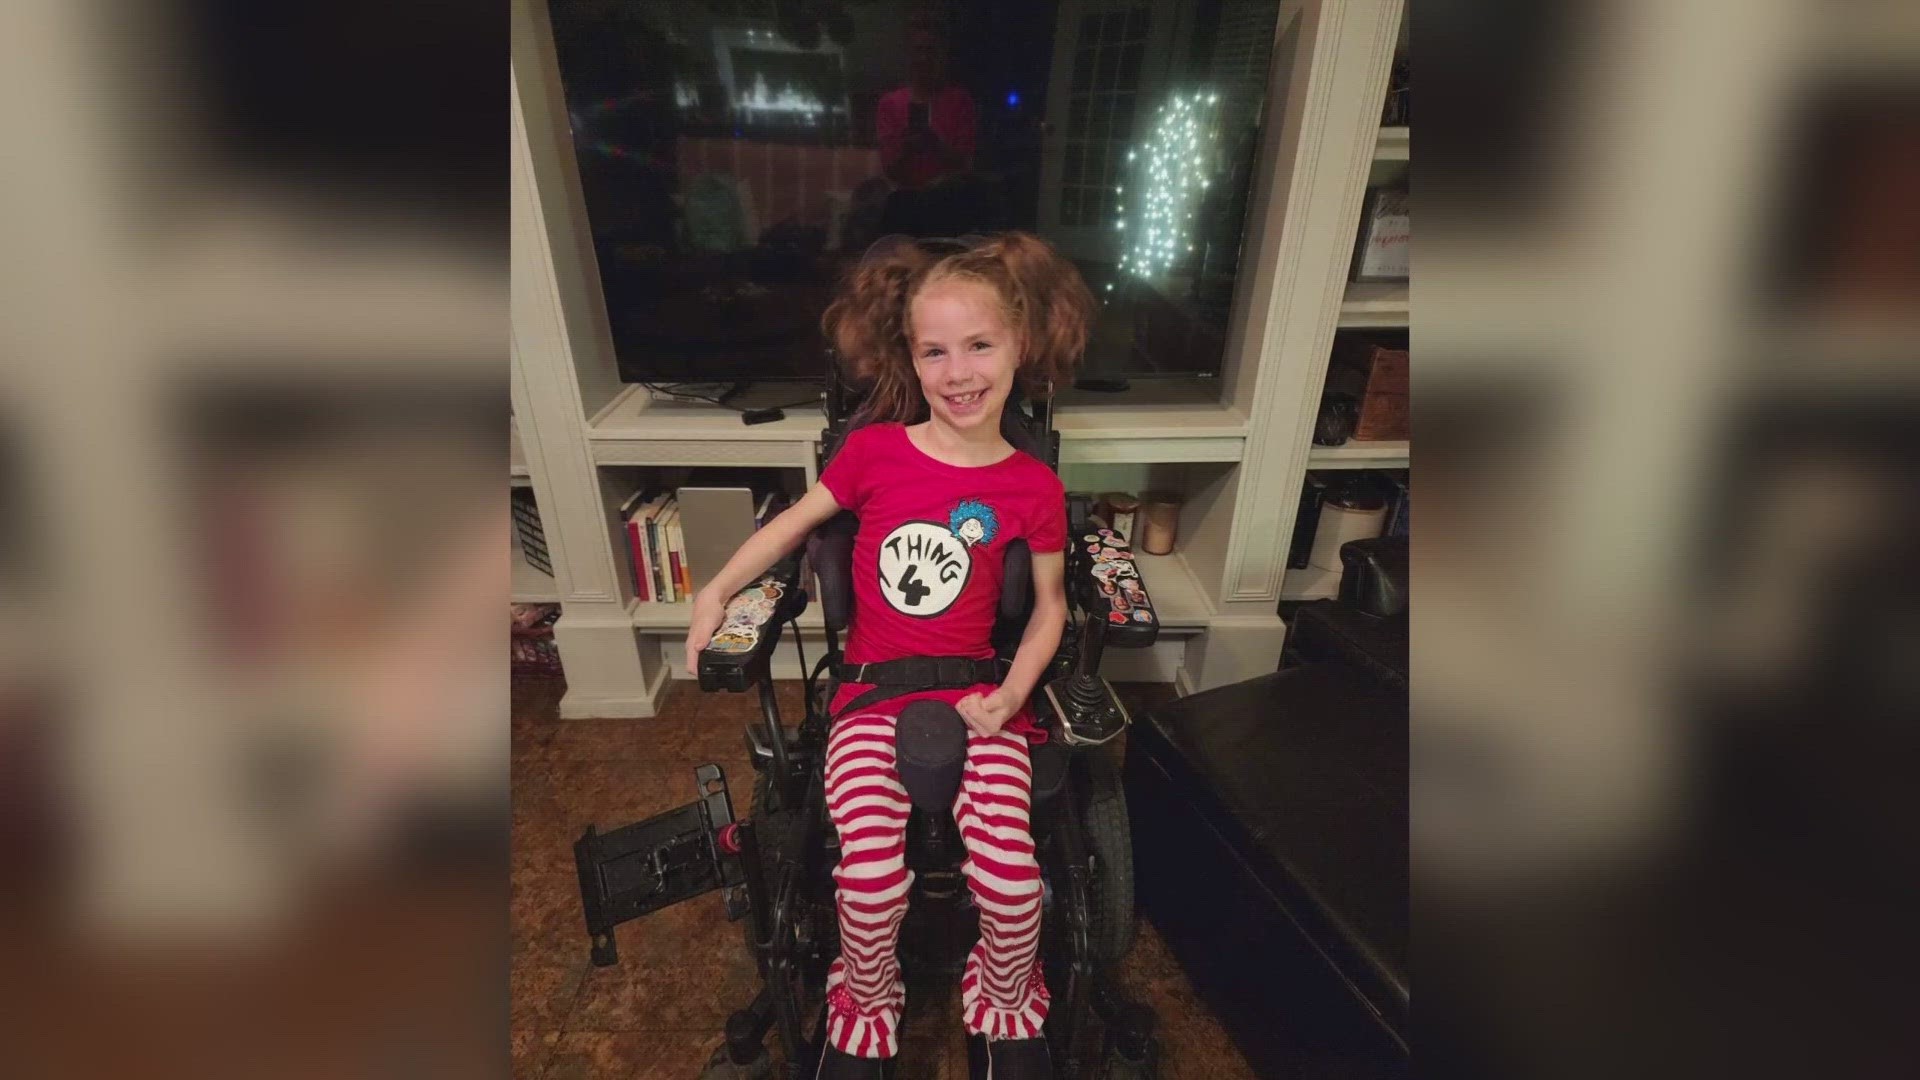 The girl's current wheelchair has become a hazard, but a new one costs more than $12,000